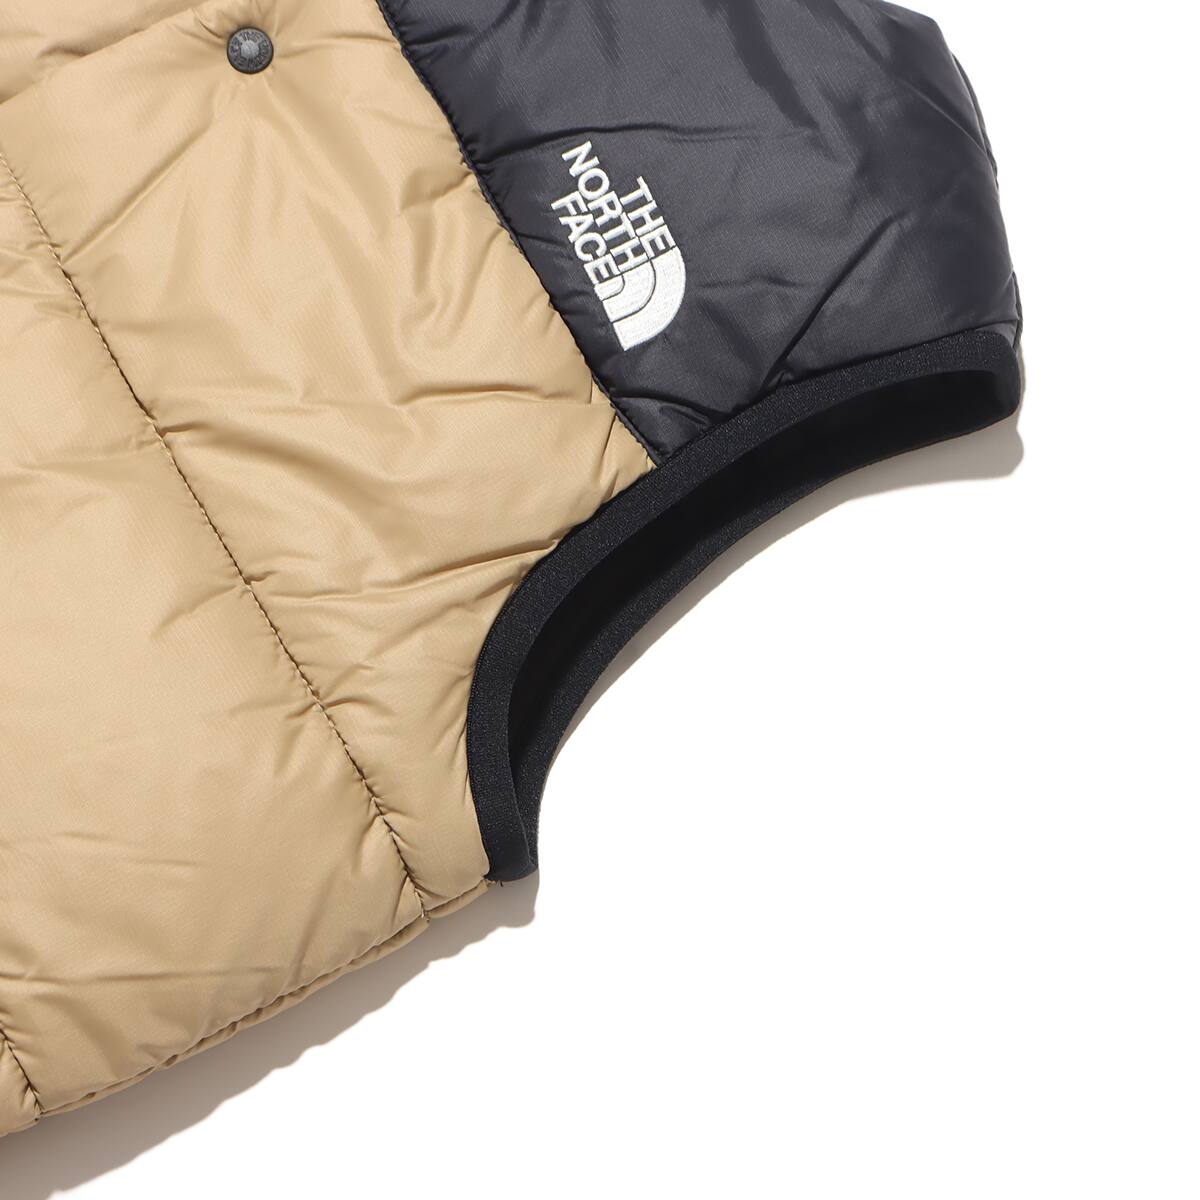 THE NORTH FACE BABY INSULATED SLEEPER ケプルタン 23FW-I